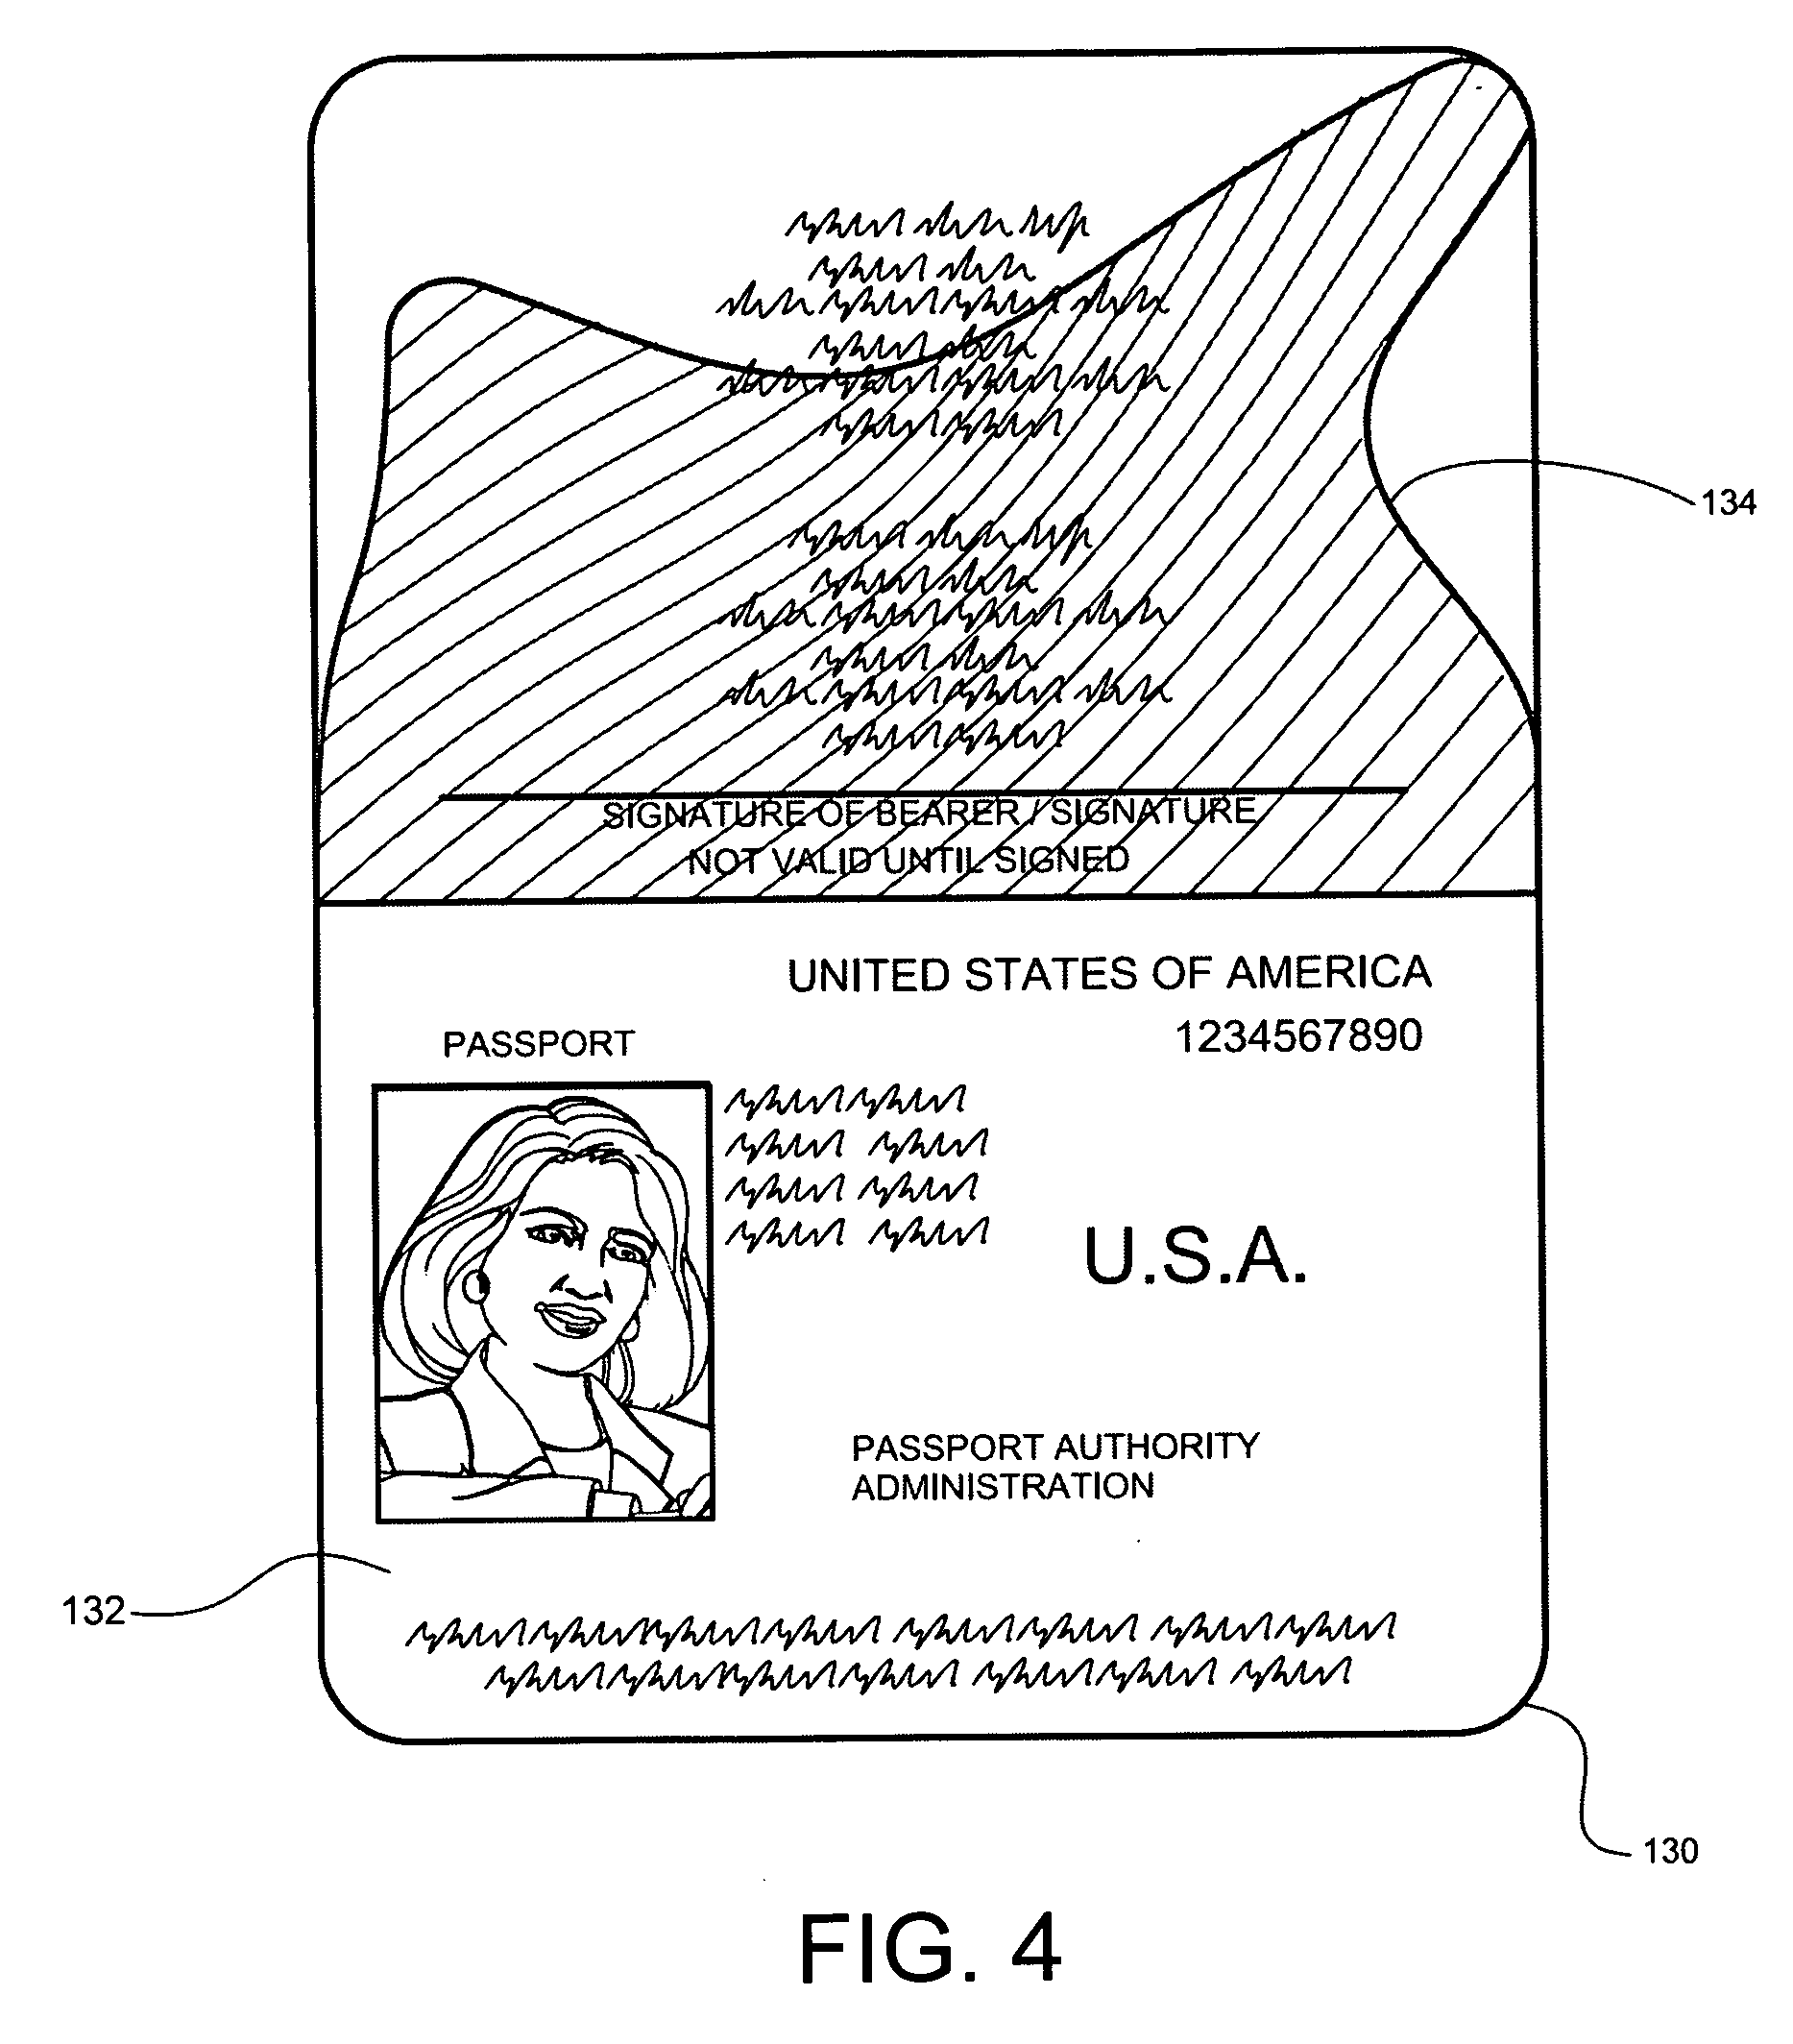 Self-authenticating documents with printed or embossed hidden images